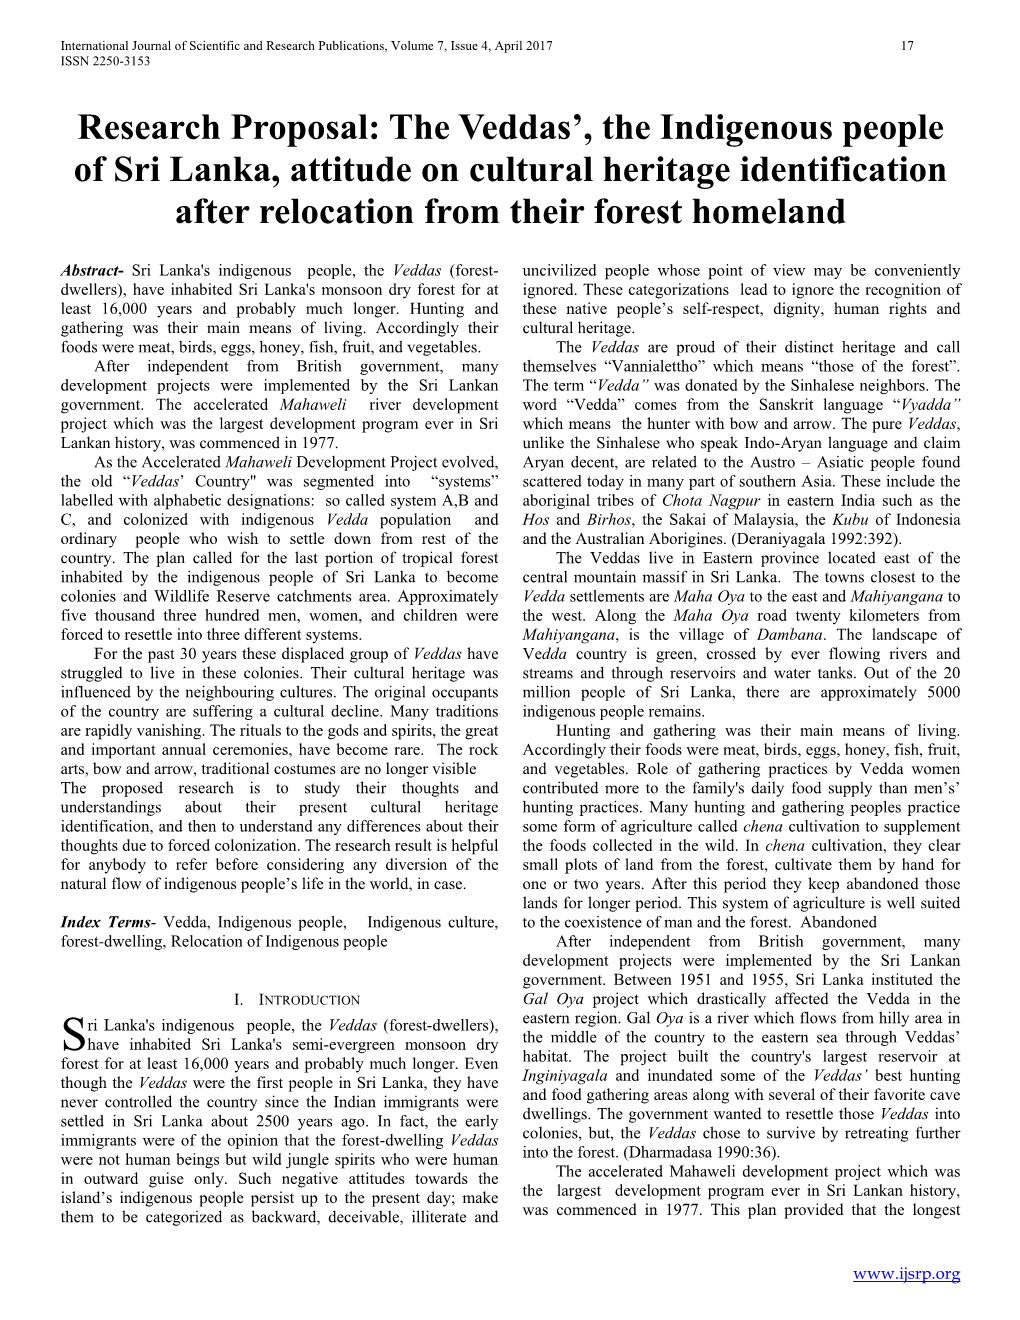 The Veddas', the Indigenous People of Sri Lanka, Attitude on Cultural